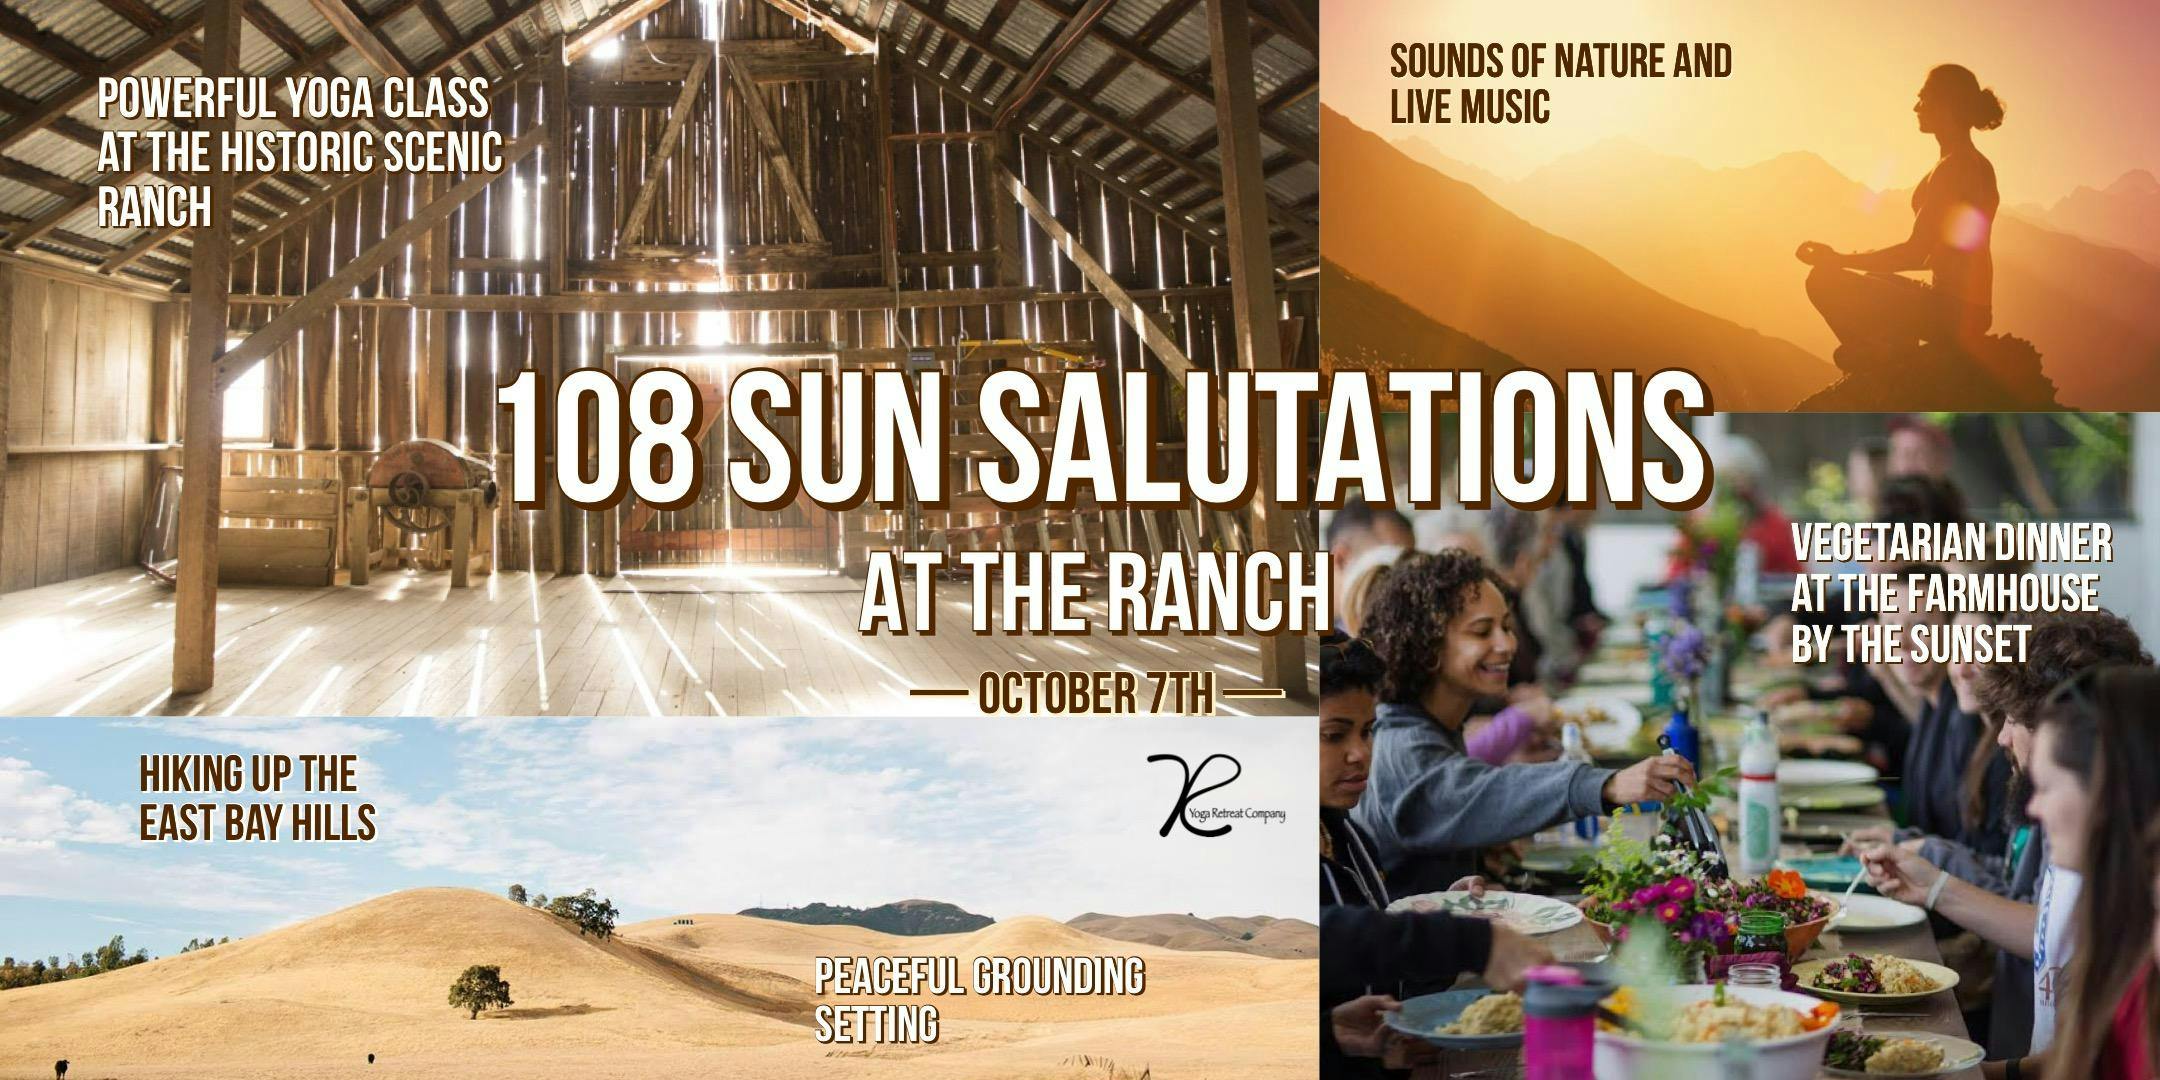 Yoga, Hiking, Live Music, Sound Therapy, Vegetarian Dinner by Sunset